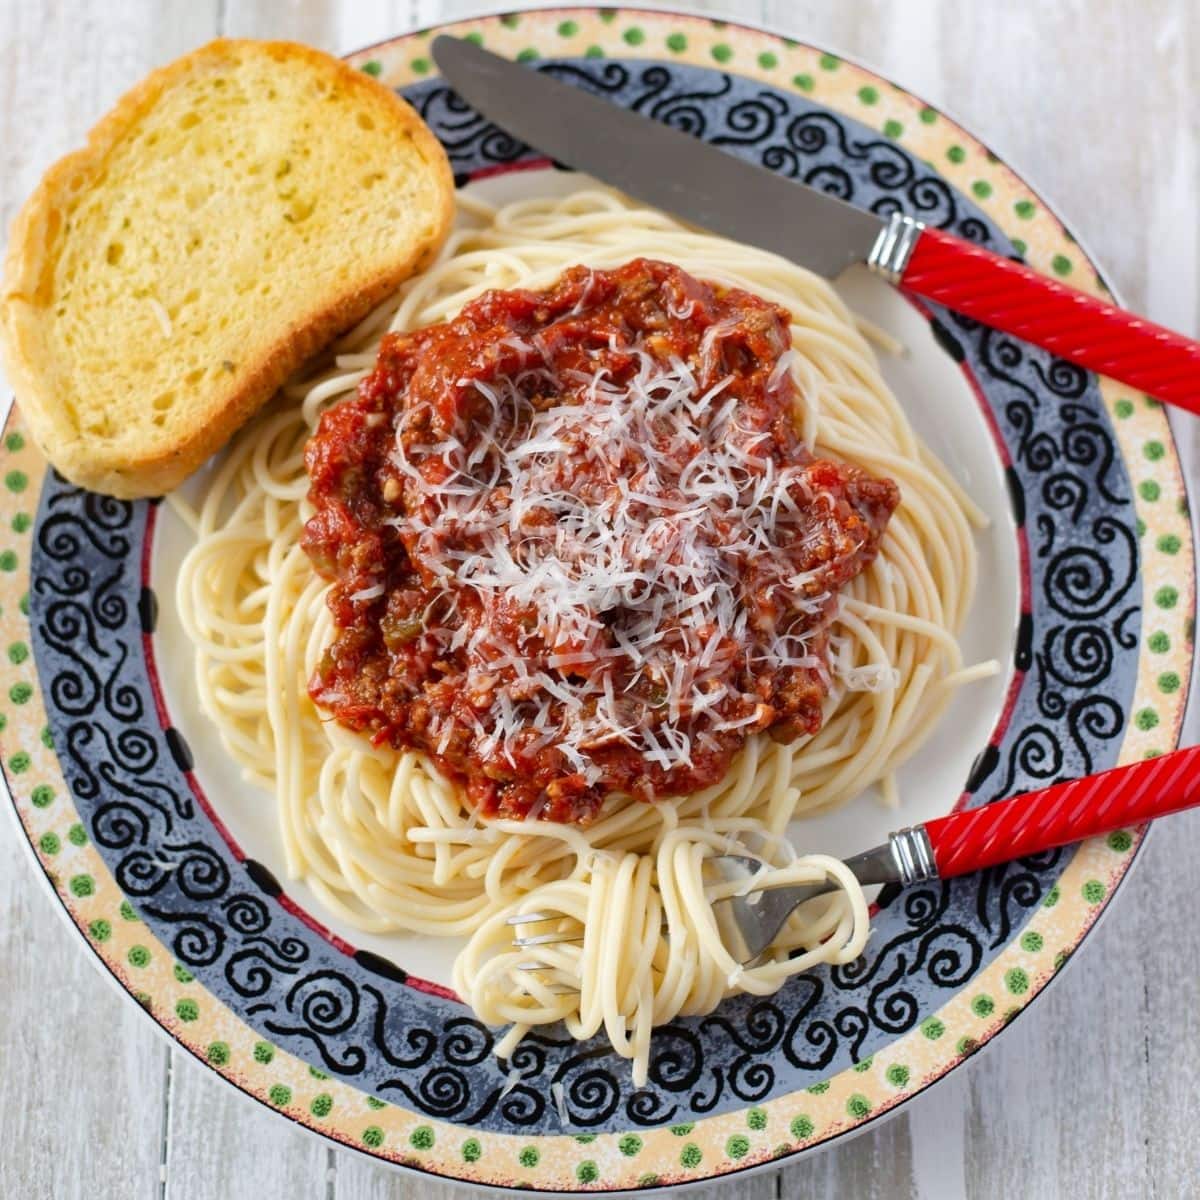 Homemade spaghetti meat sauce made in a slow cooker and served over pasta.